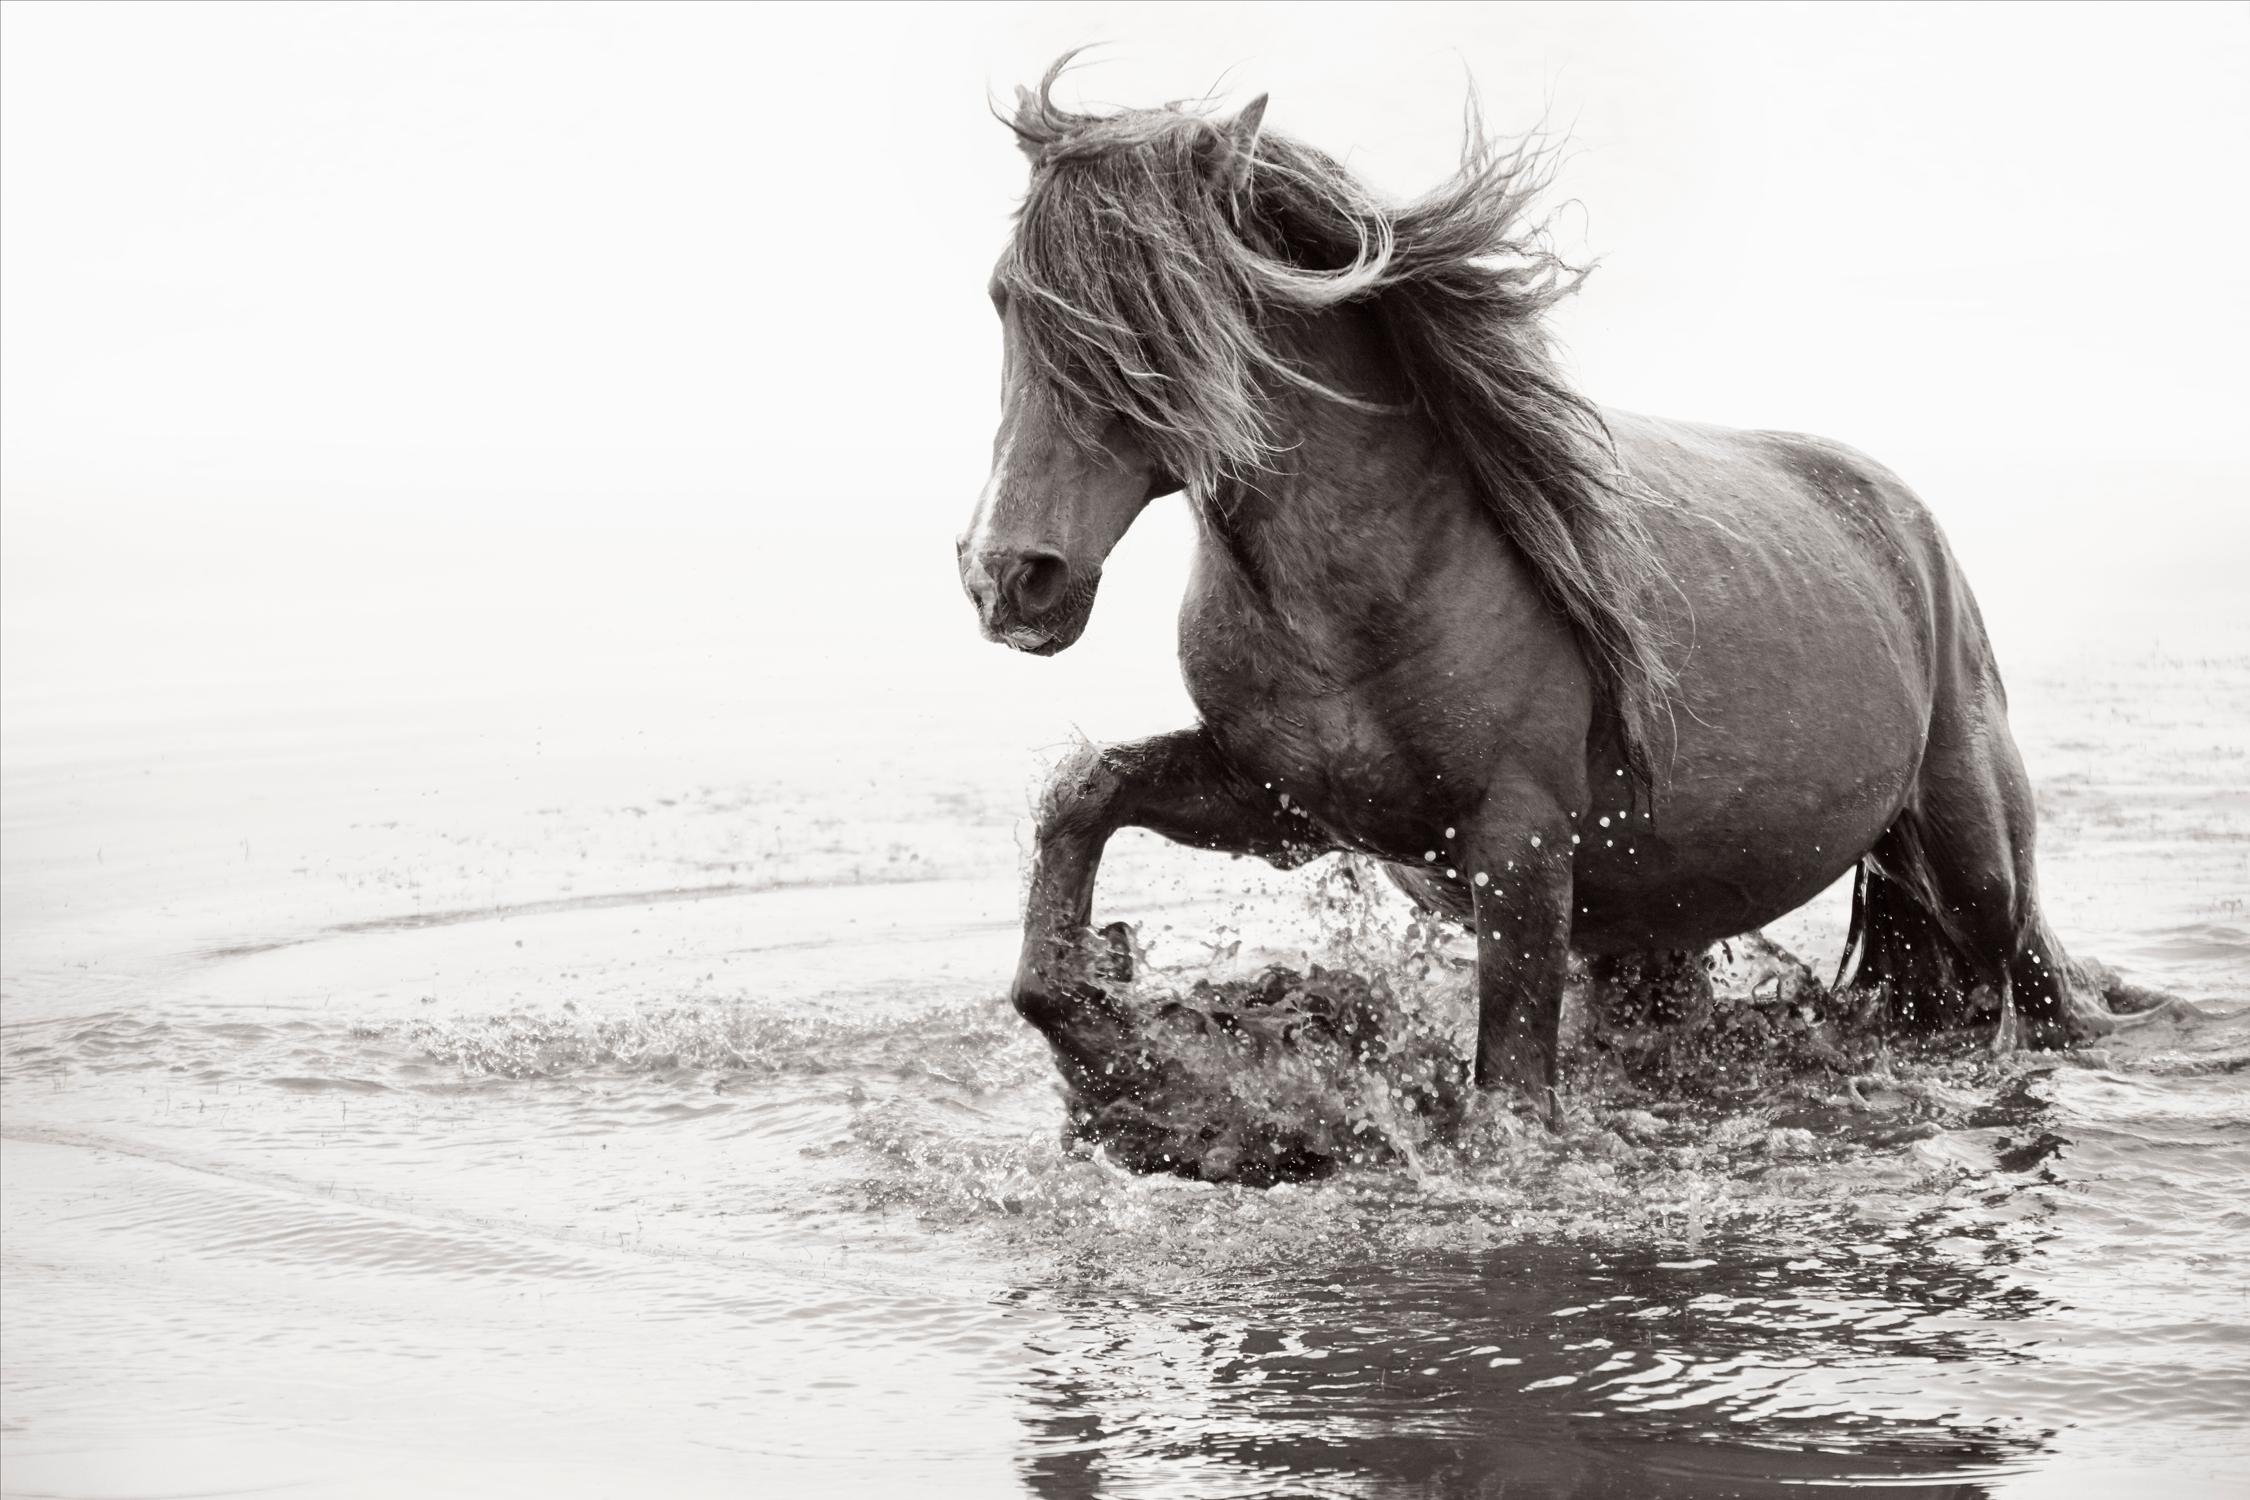 Drew Doggett Portrait Photograph - Wild Horse Walking Through Water with Mane Blowing in Wind, Best-Selling Print 